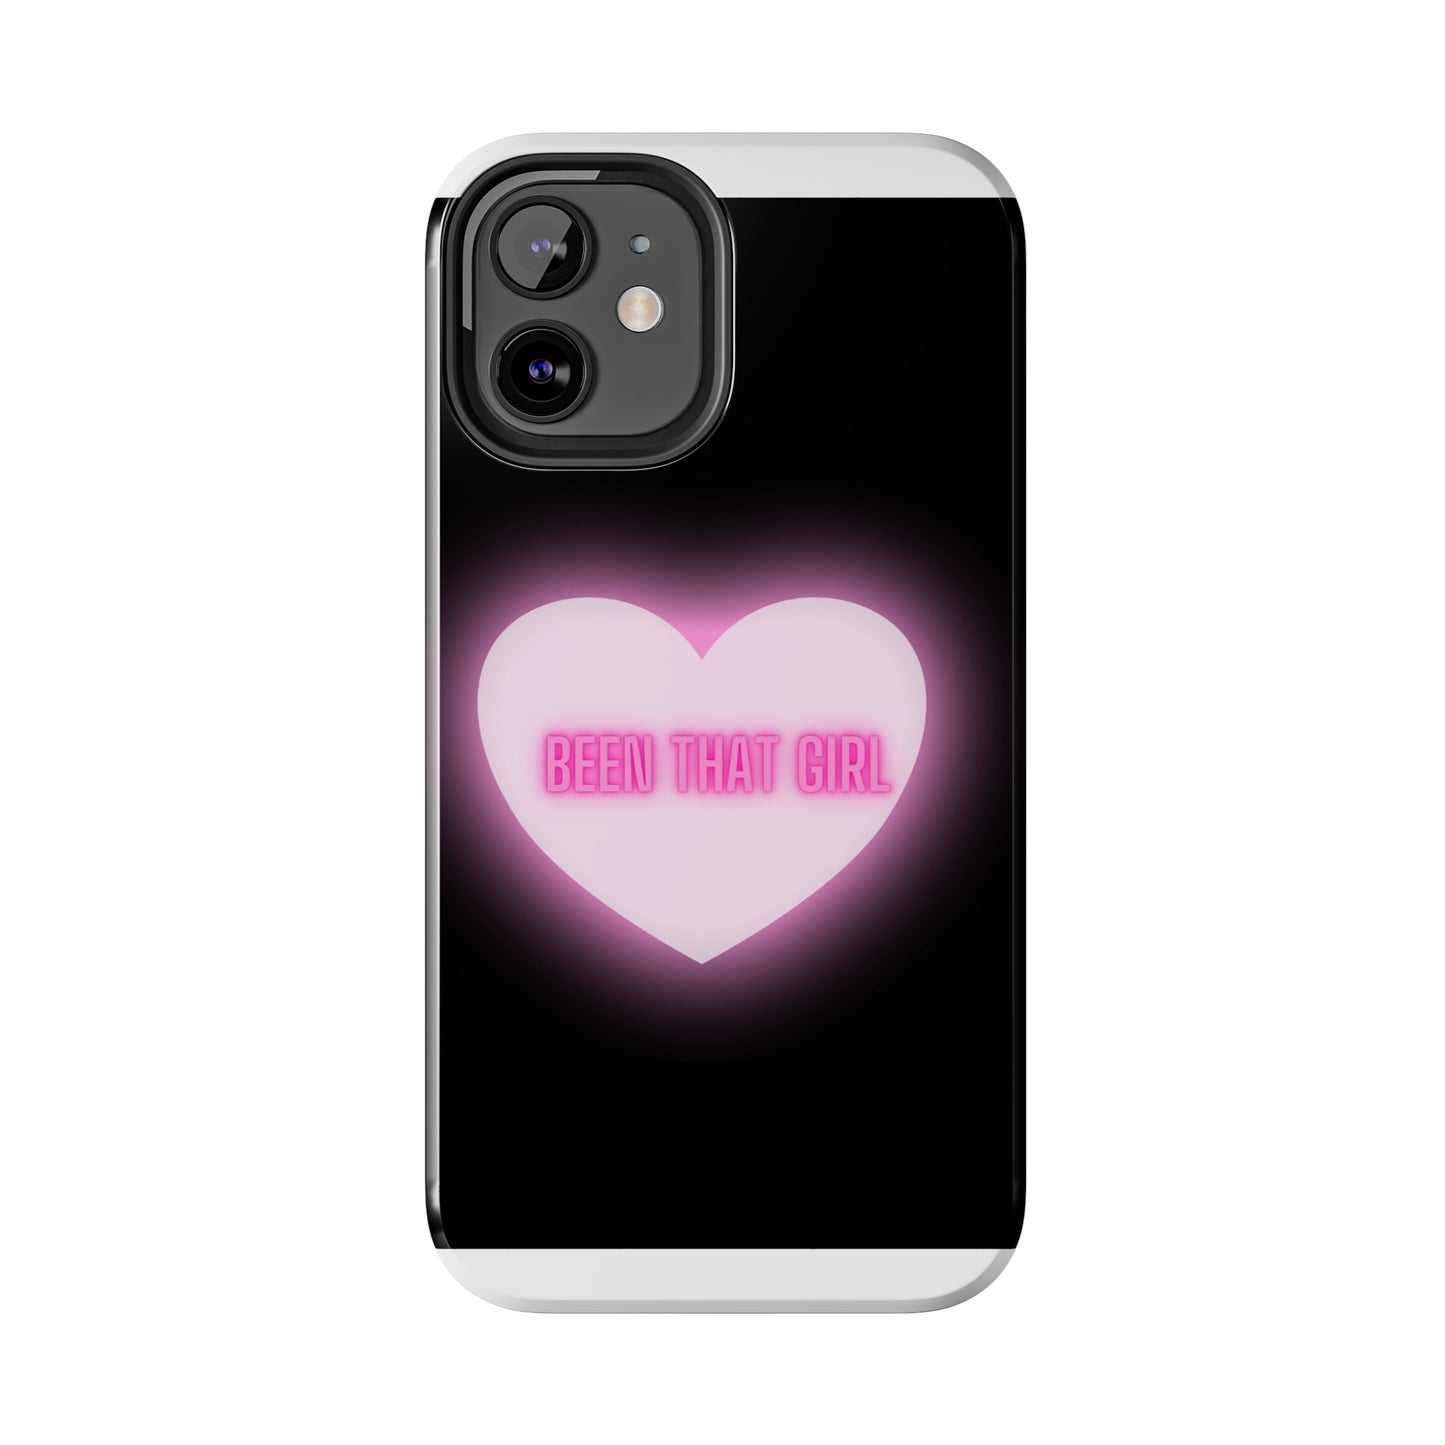 Been that girl iPhone case